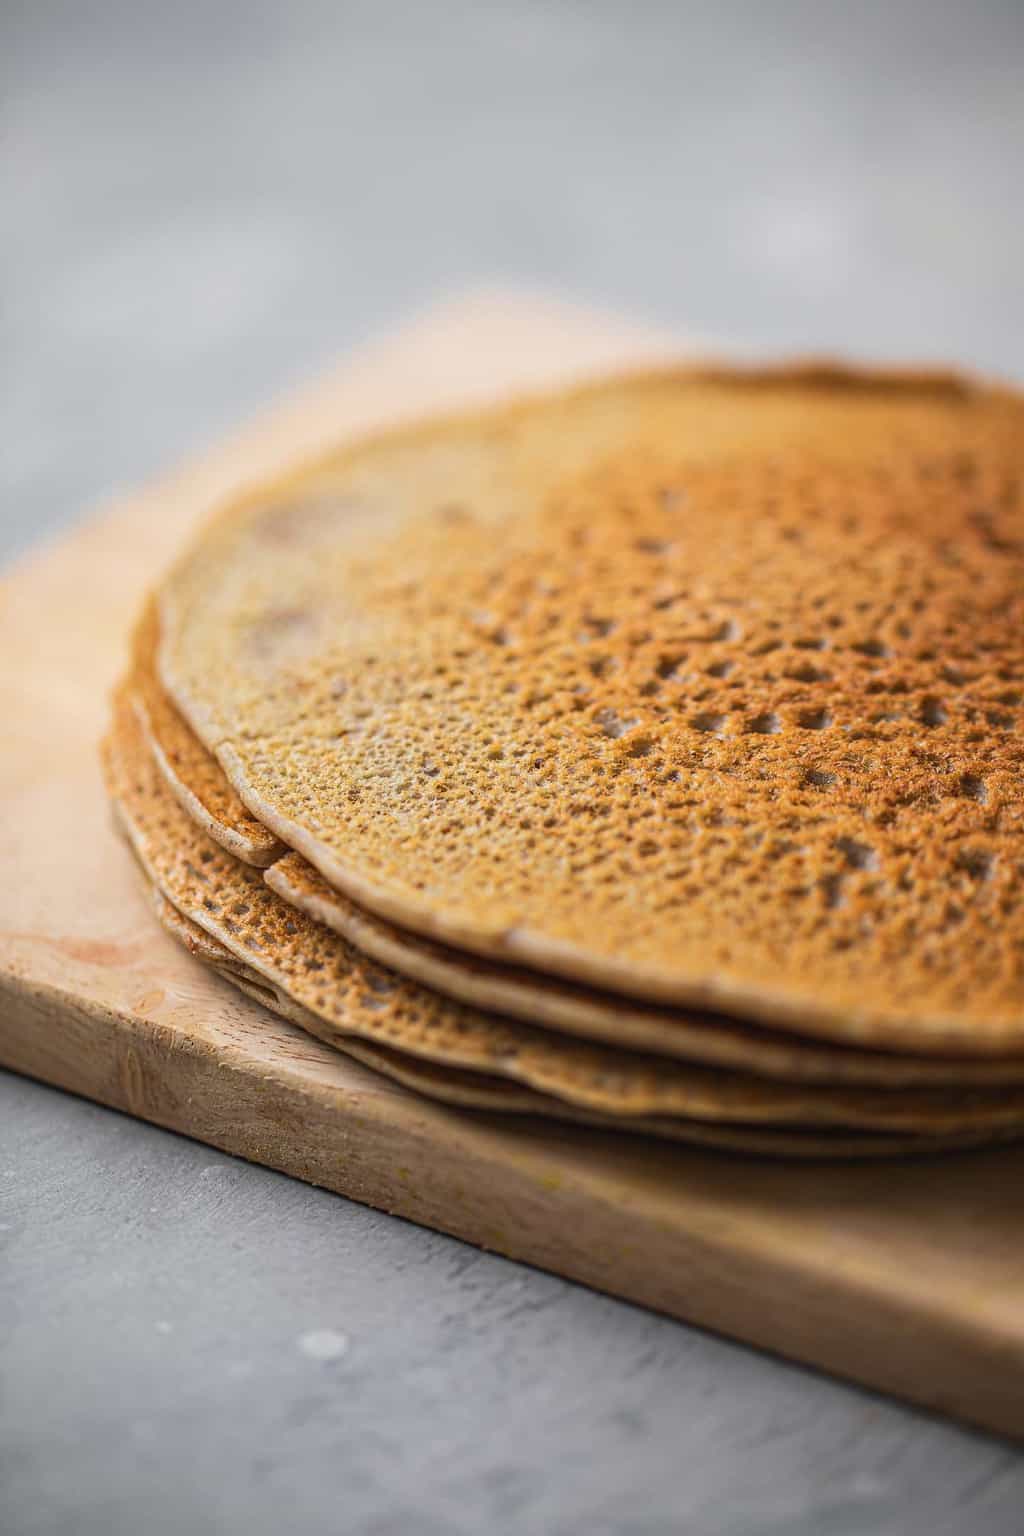 Buckwheat crepes resting on a wooden chopping board